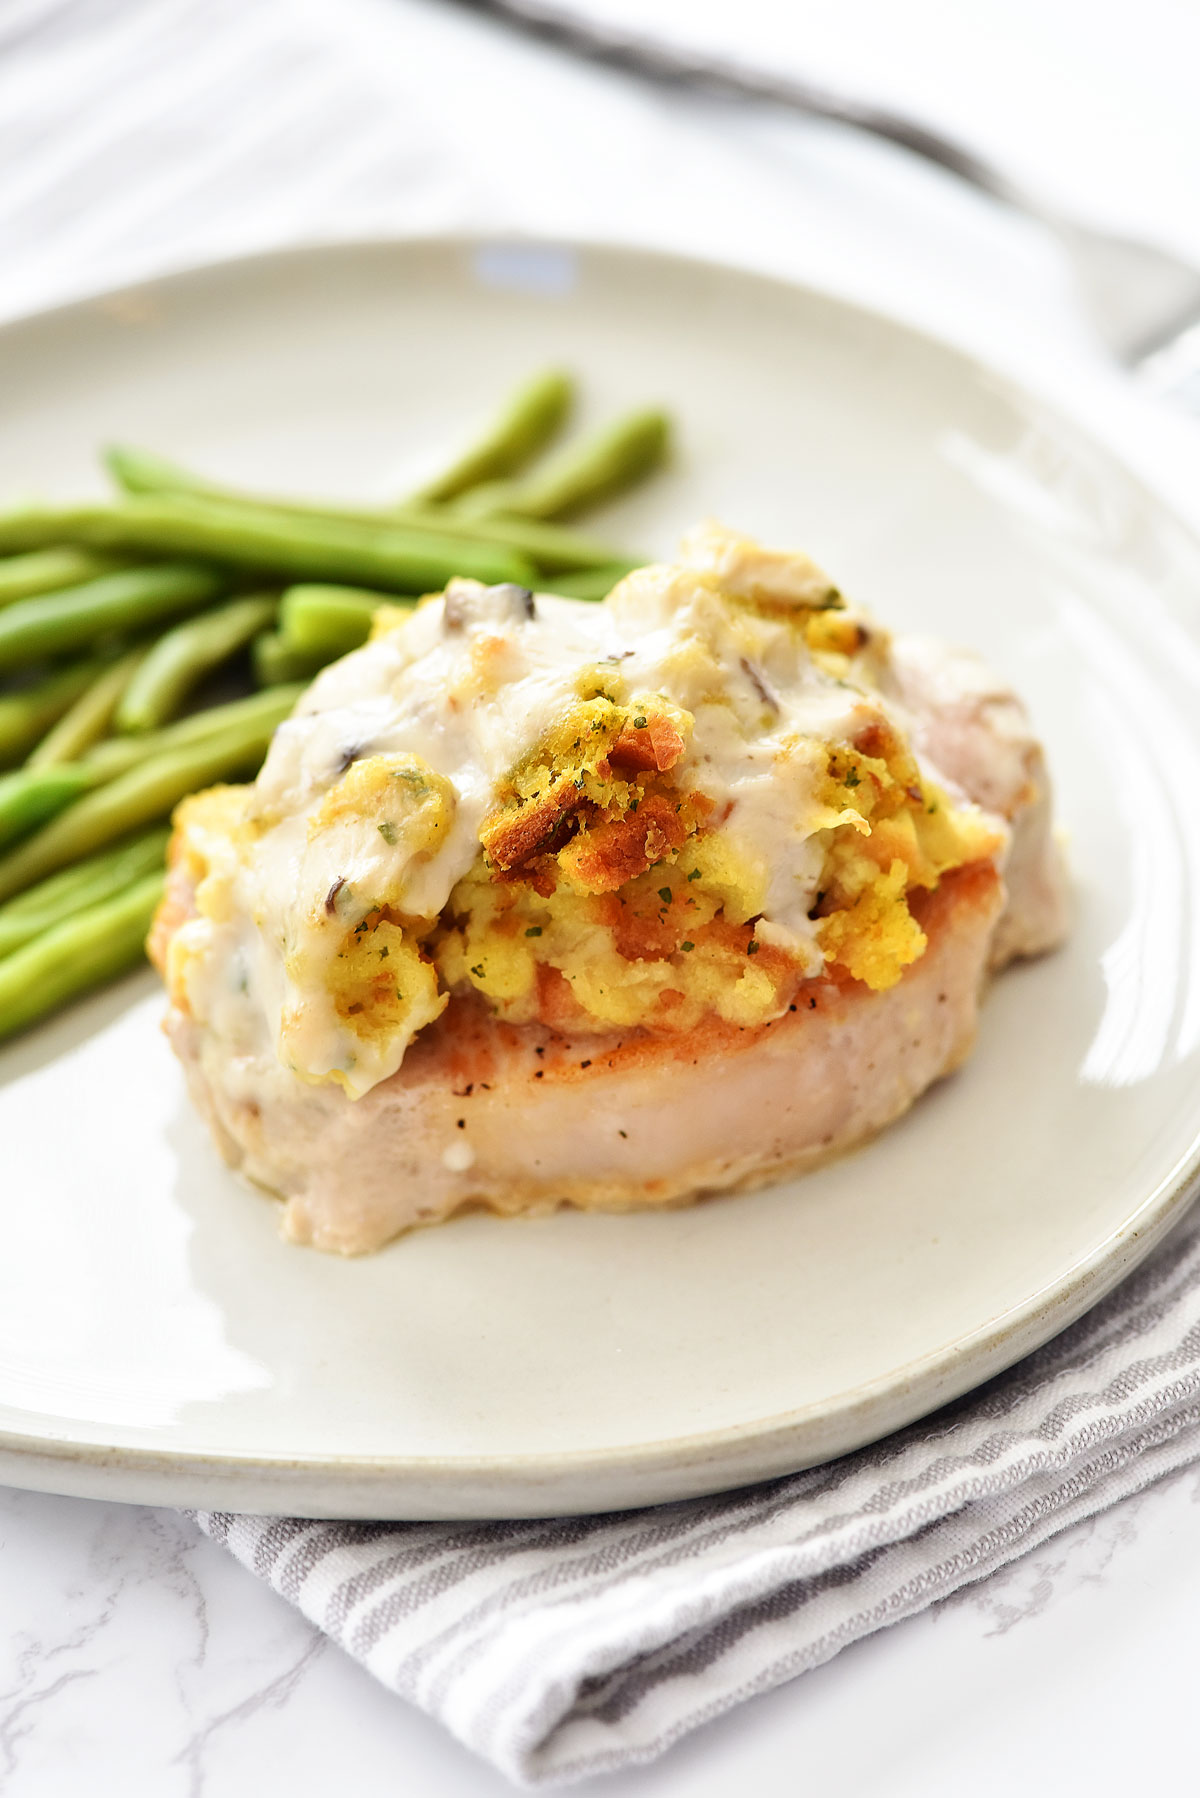 Stuffing-Topped Pork Chops are tender, flavorful chops with savory pork stuffing and creamy gravy on top. Life-in-the-Lofthouse.com